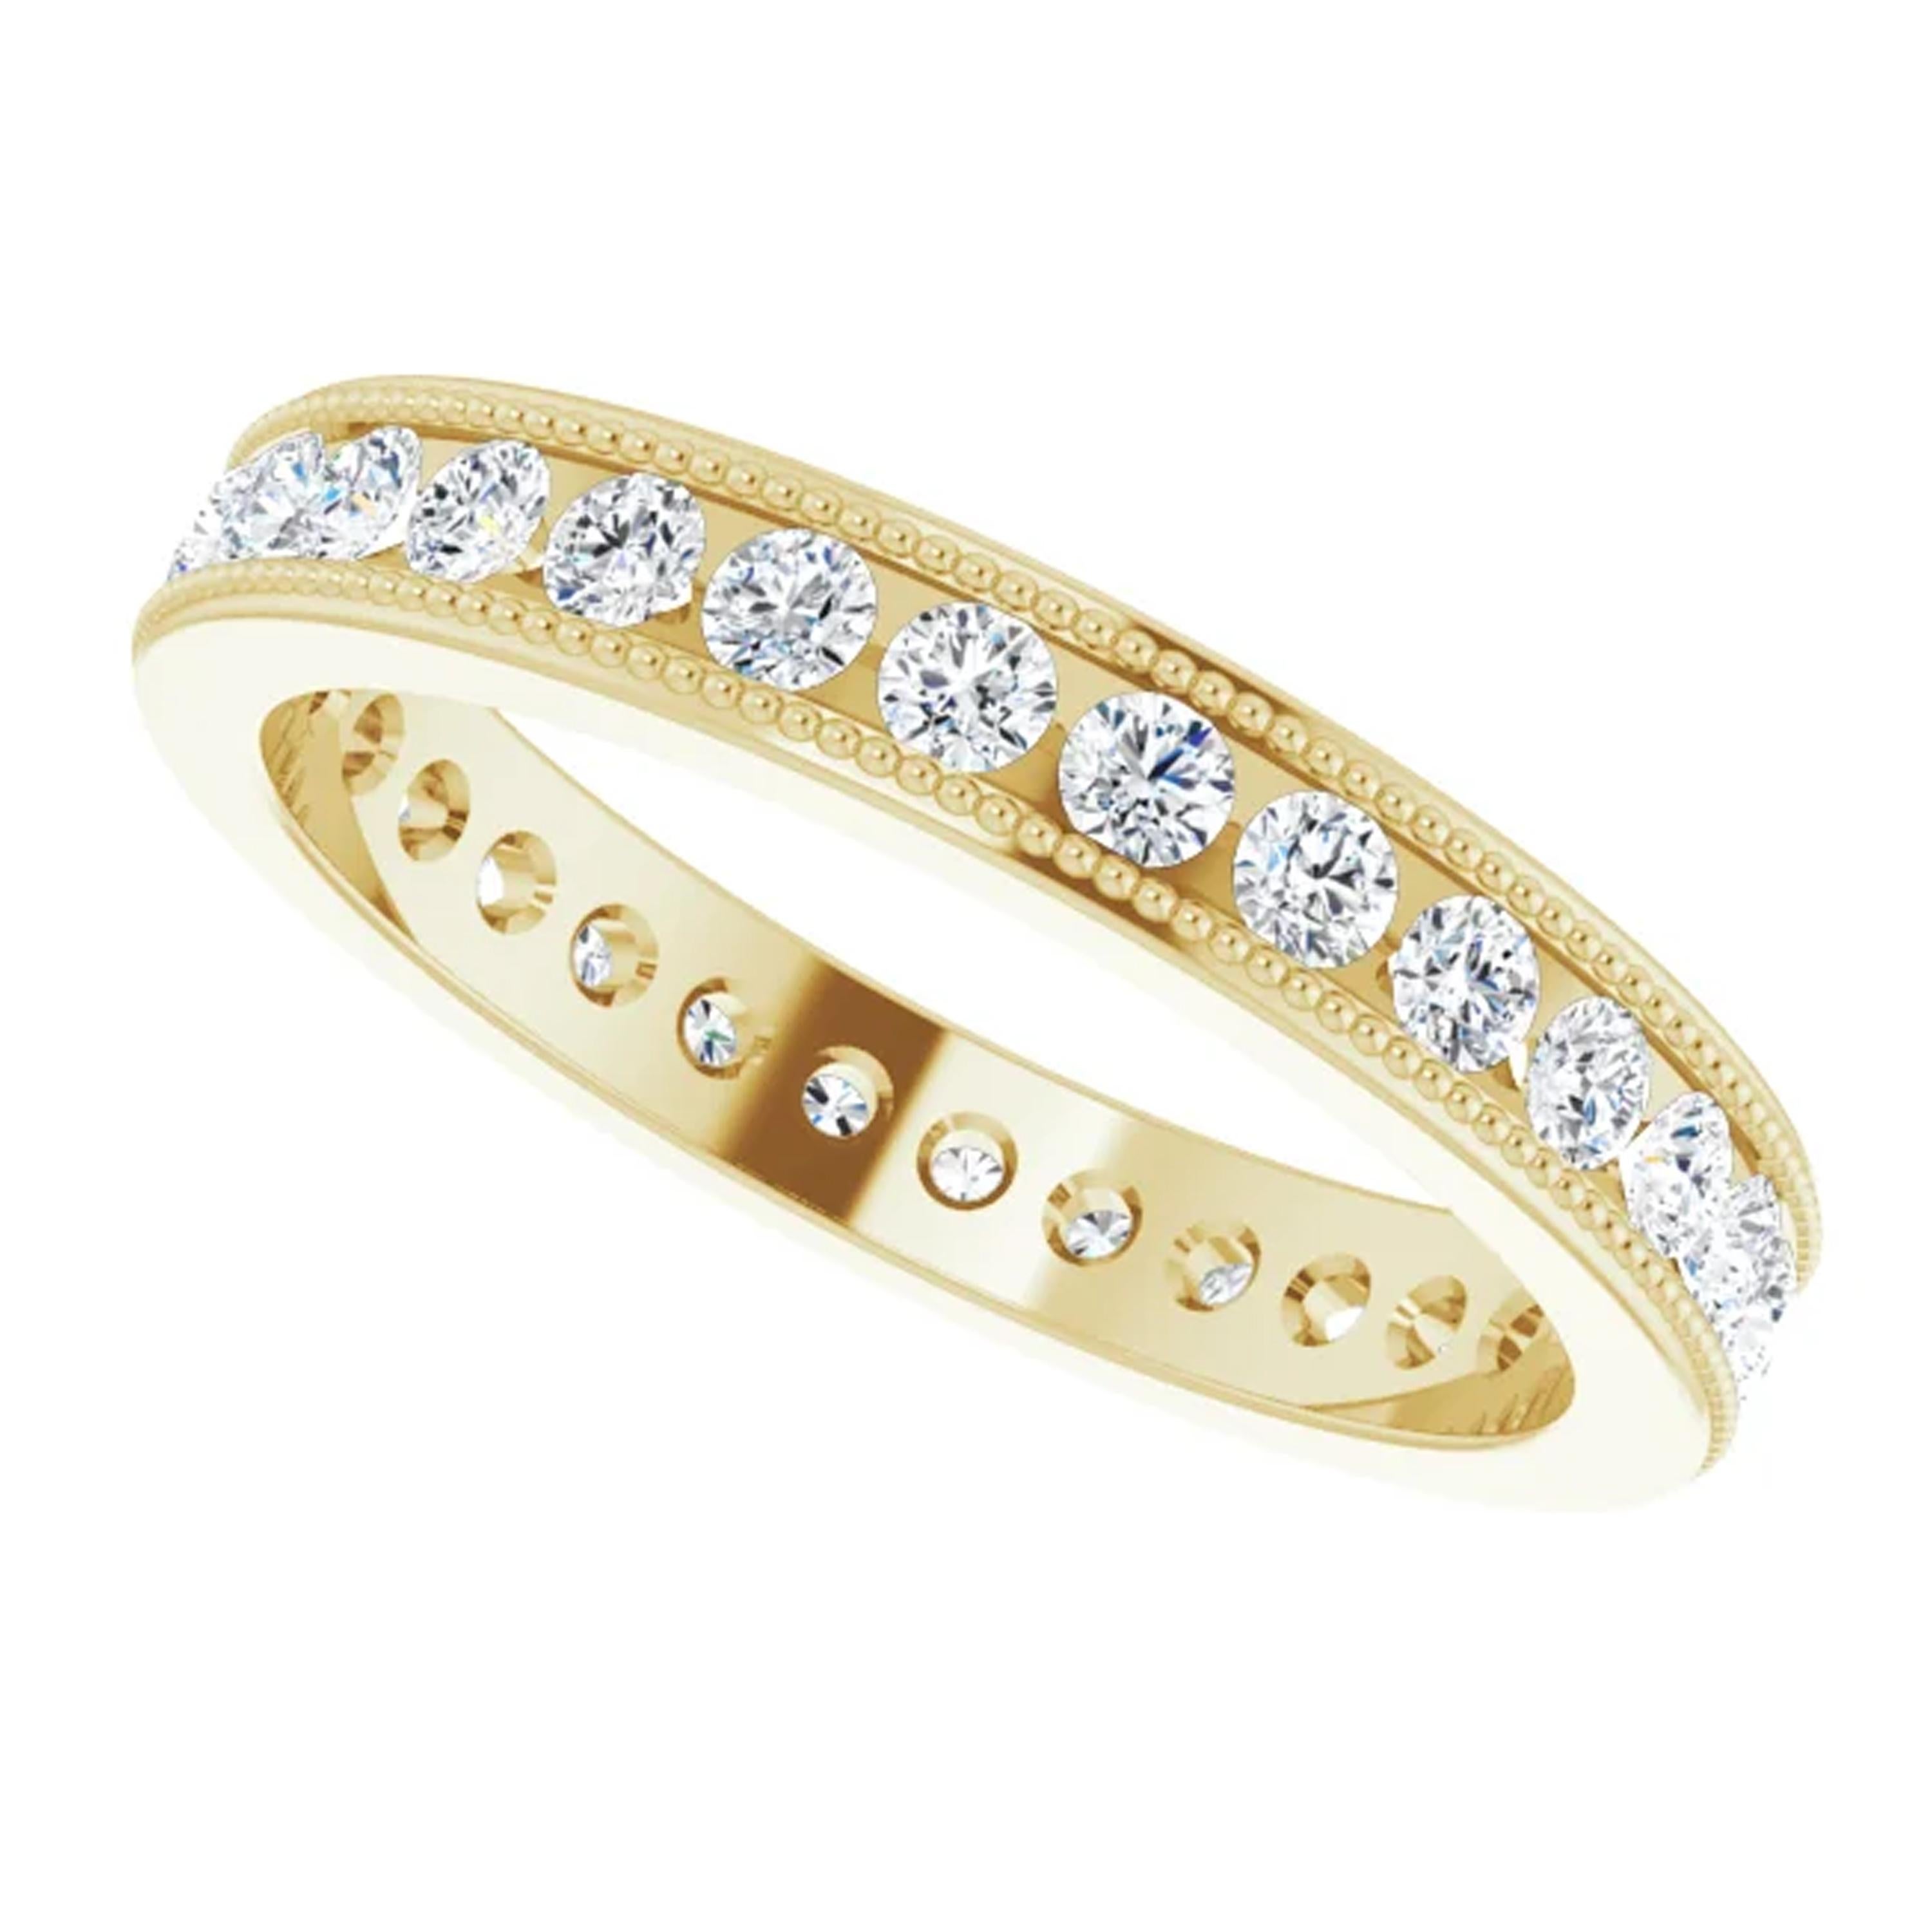 Women's Vintage Style Channel Diamond Eternity Wedding Band 18k Yellow Gold 0.96 Carat For Sale